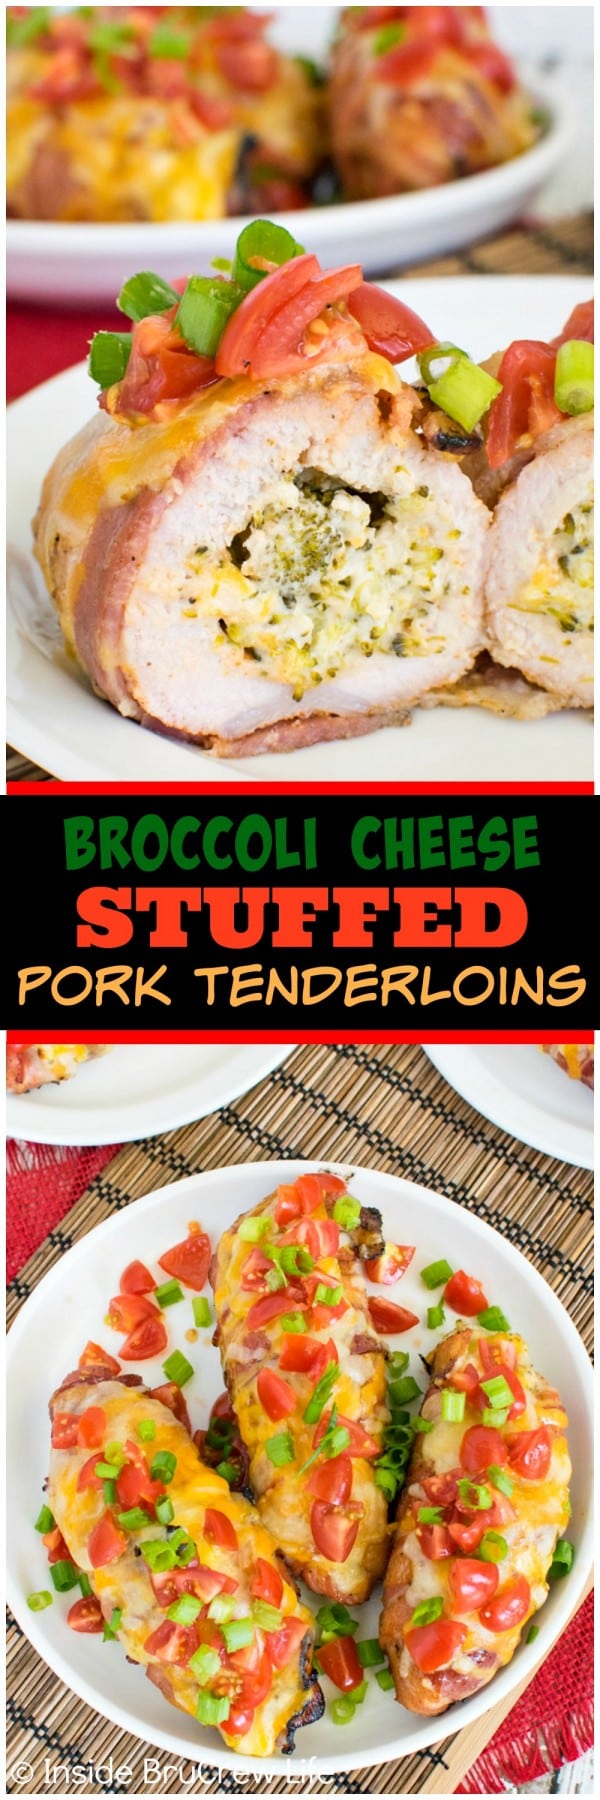 Broccoli Cheese Stuffed Pork Tenderloins - stuffing tenderloins with cheese and veggies makes this meal disappear in a hurry. Awesome dinner recipe!